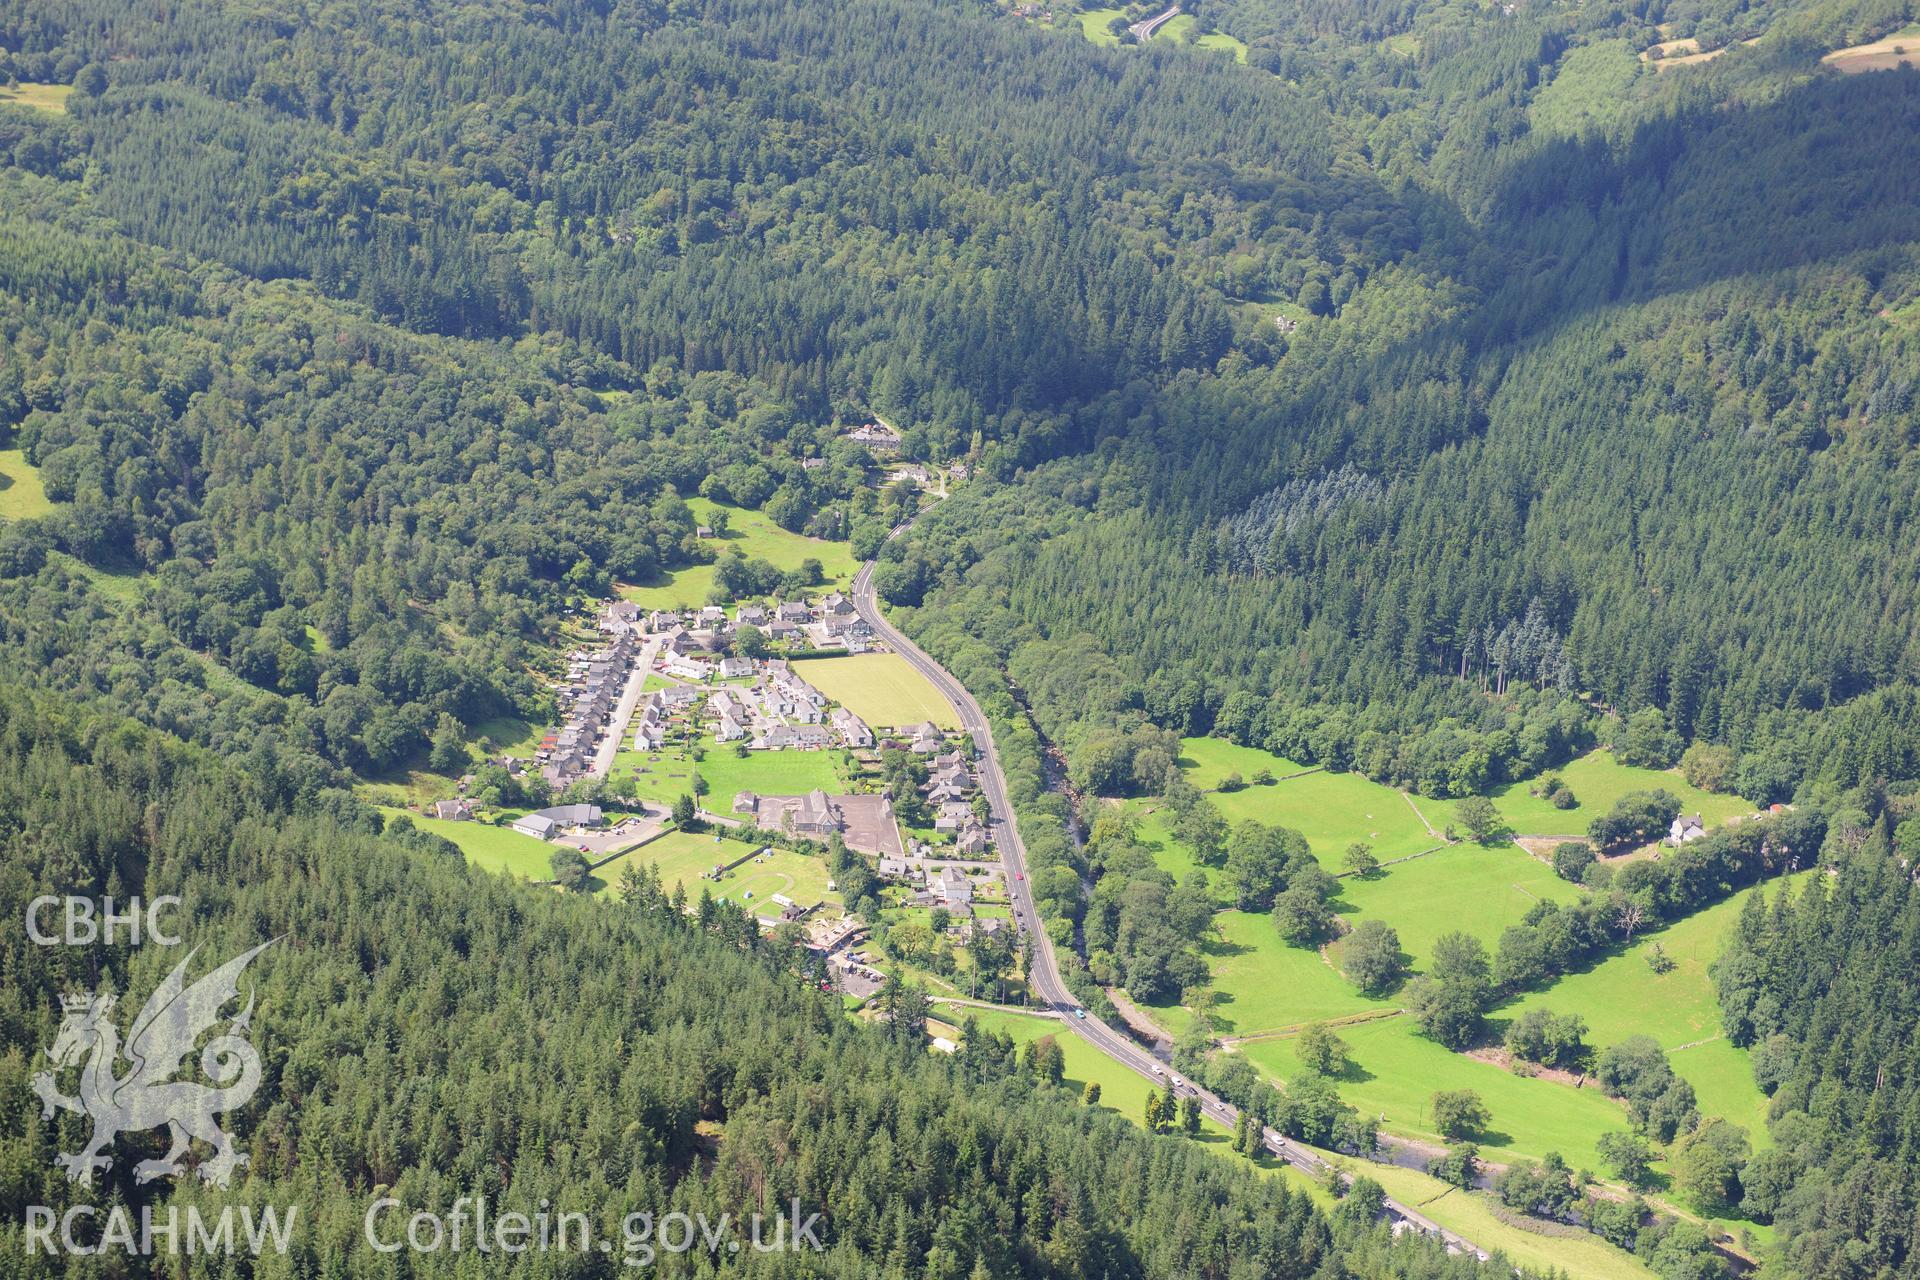 RCAHMW colour oblique photograph of Betws-y-Coed, viewed from the south-west. Taken by Toby Driver on 10/08/2012.